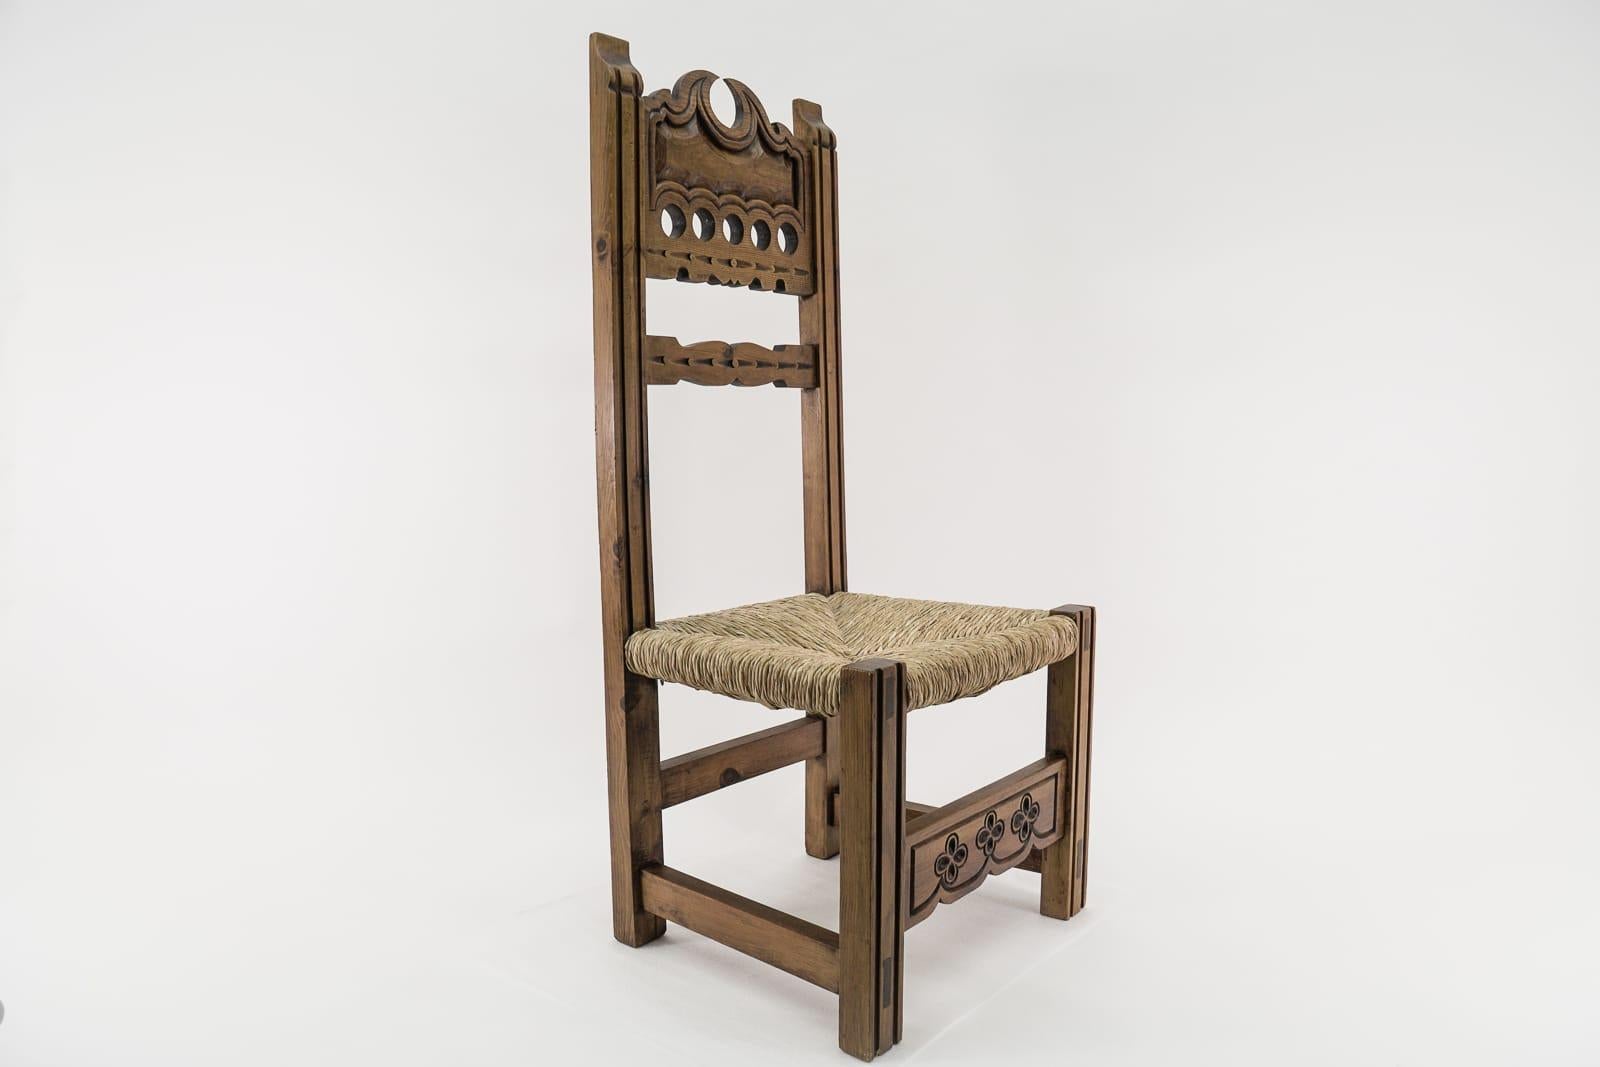 Great hand carved wooden high back chair with sea grass seat from Spain, 1960s.

The pictures speak for themselves.